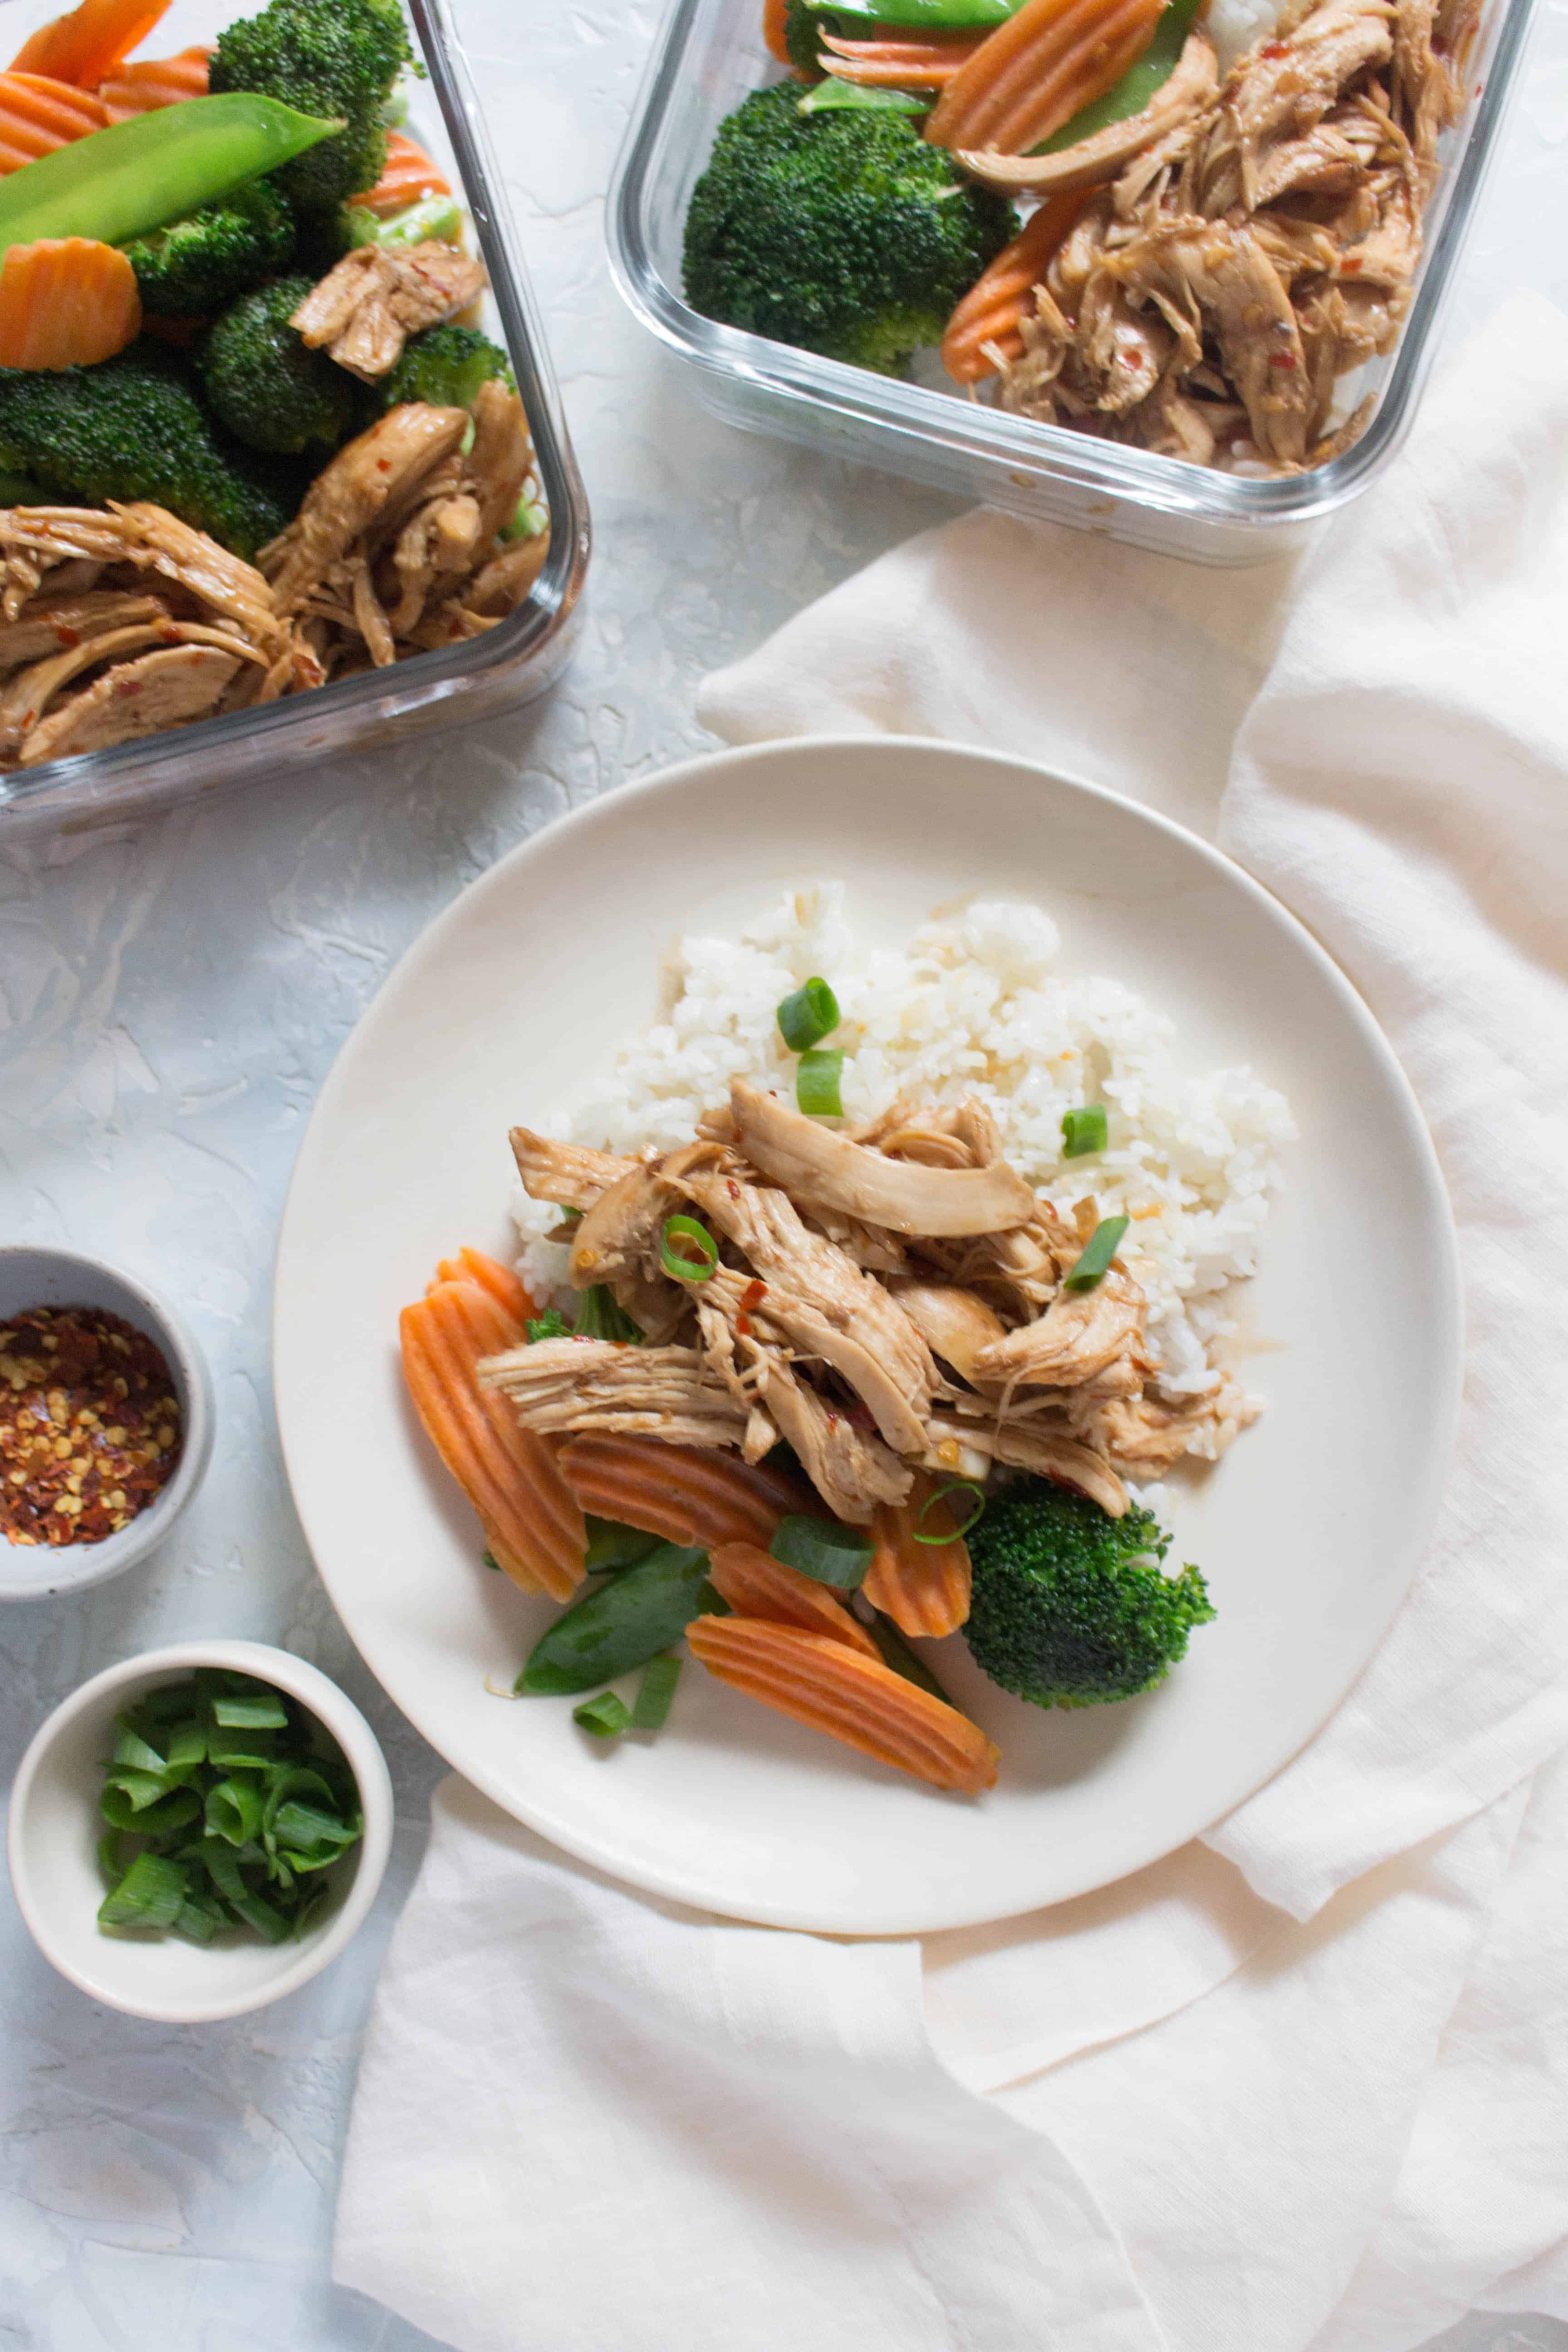 This Instant Pot Chicken Teriyaki is full of bold flavours that will quickly become a weeknight family favourite! Plus it makes for the perfect speedy protein for your weekend meal prep.